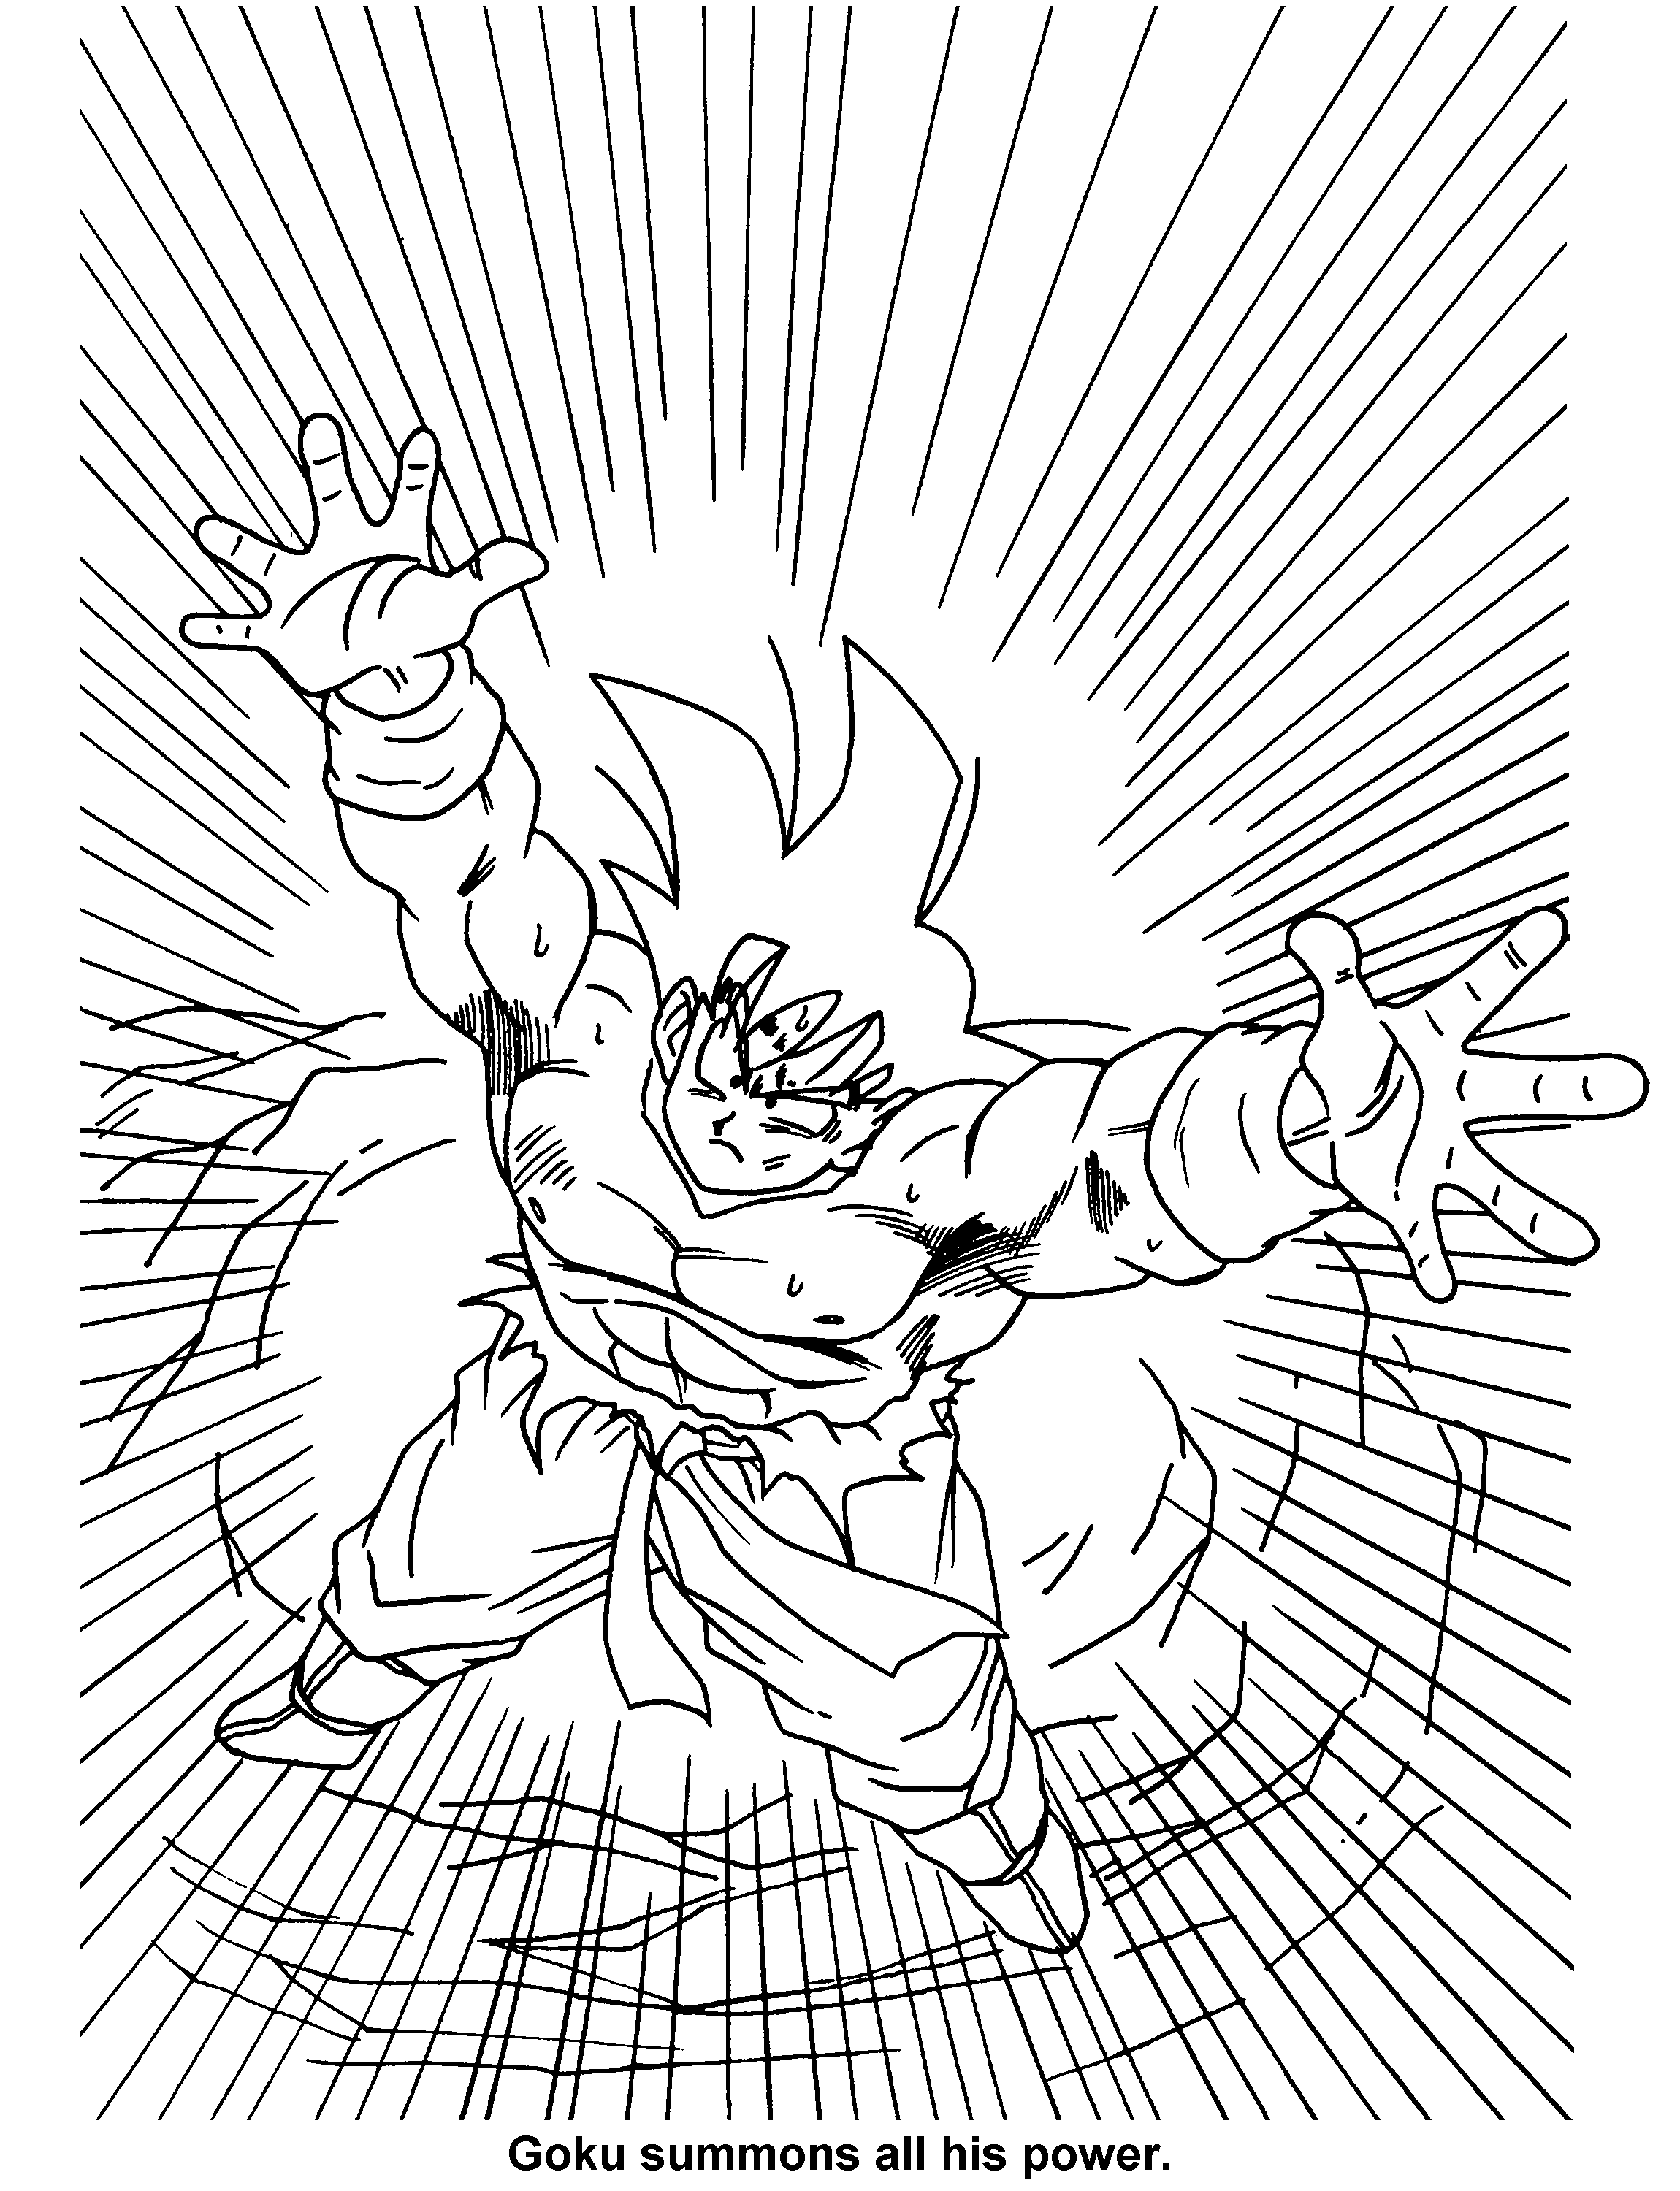 animated-coloring-pages-dragon-ball-z-image-0064